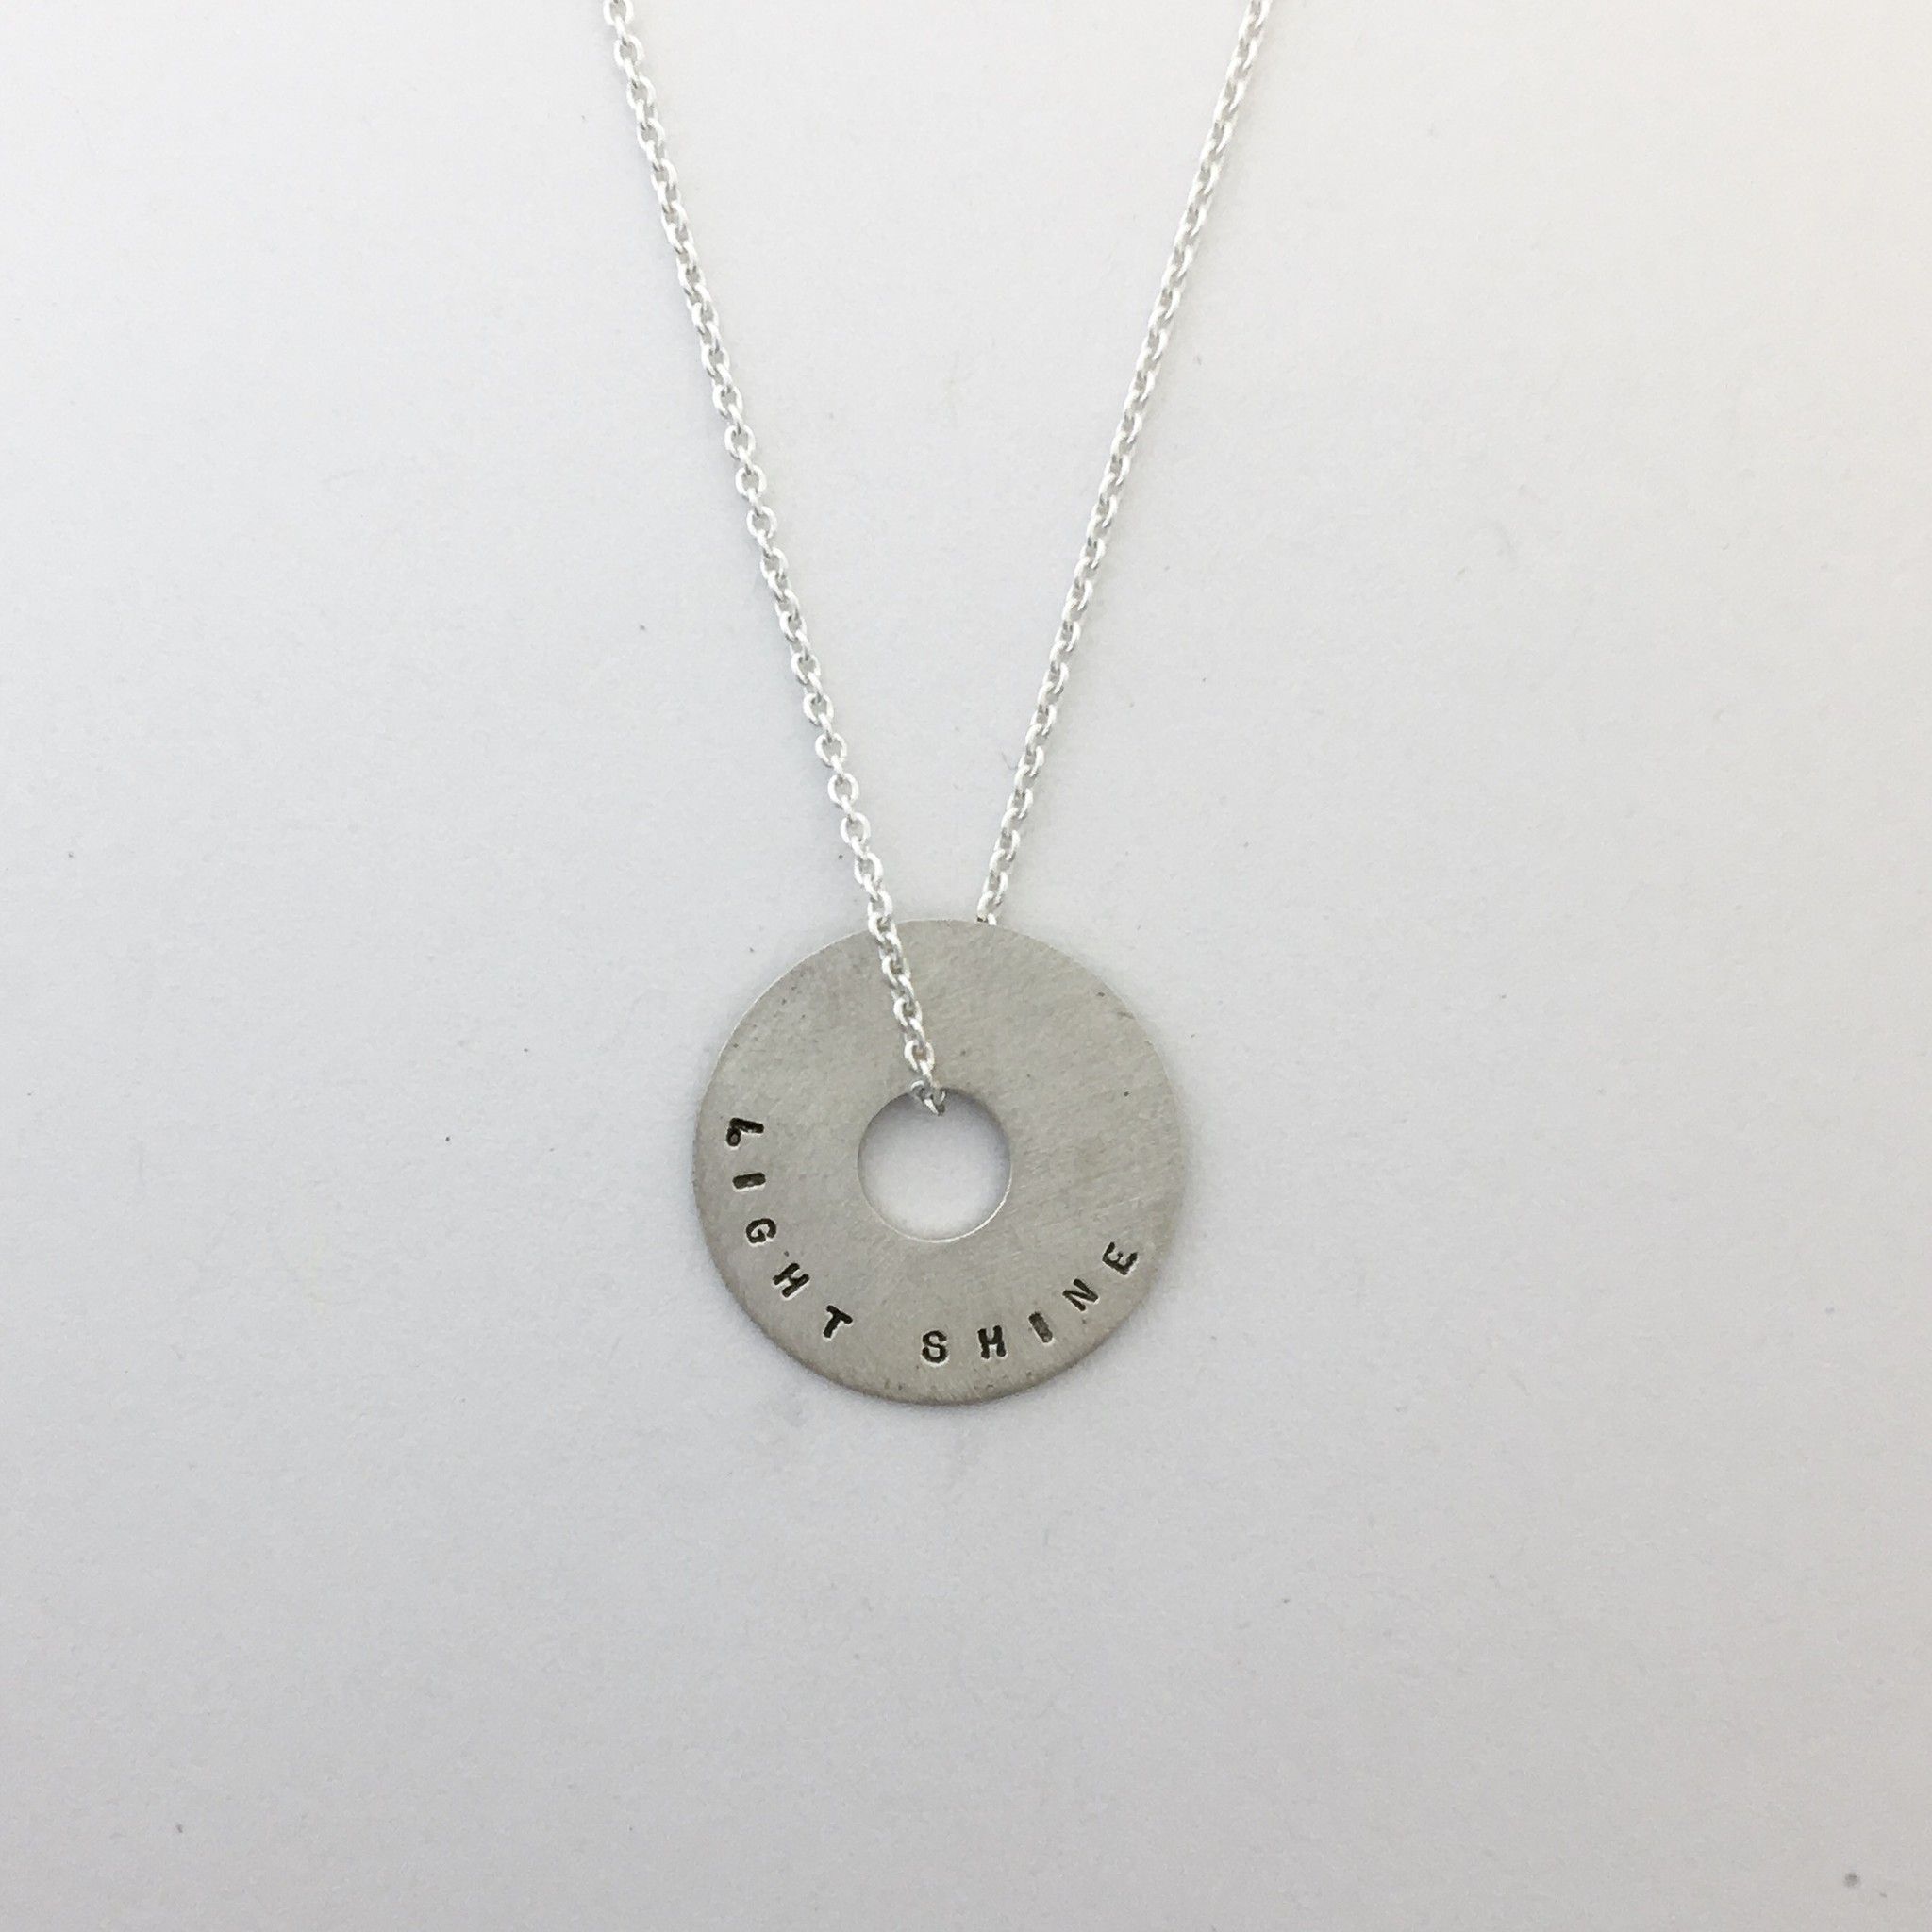 Andrea Waines Small "let Your Light Shine" Halo Necklace Intended For Best And Newest Square Sparkle Halo Necklaces (View 8 of 25)